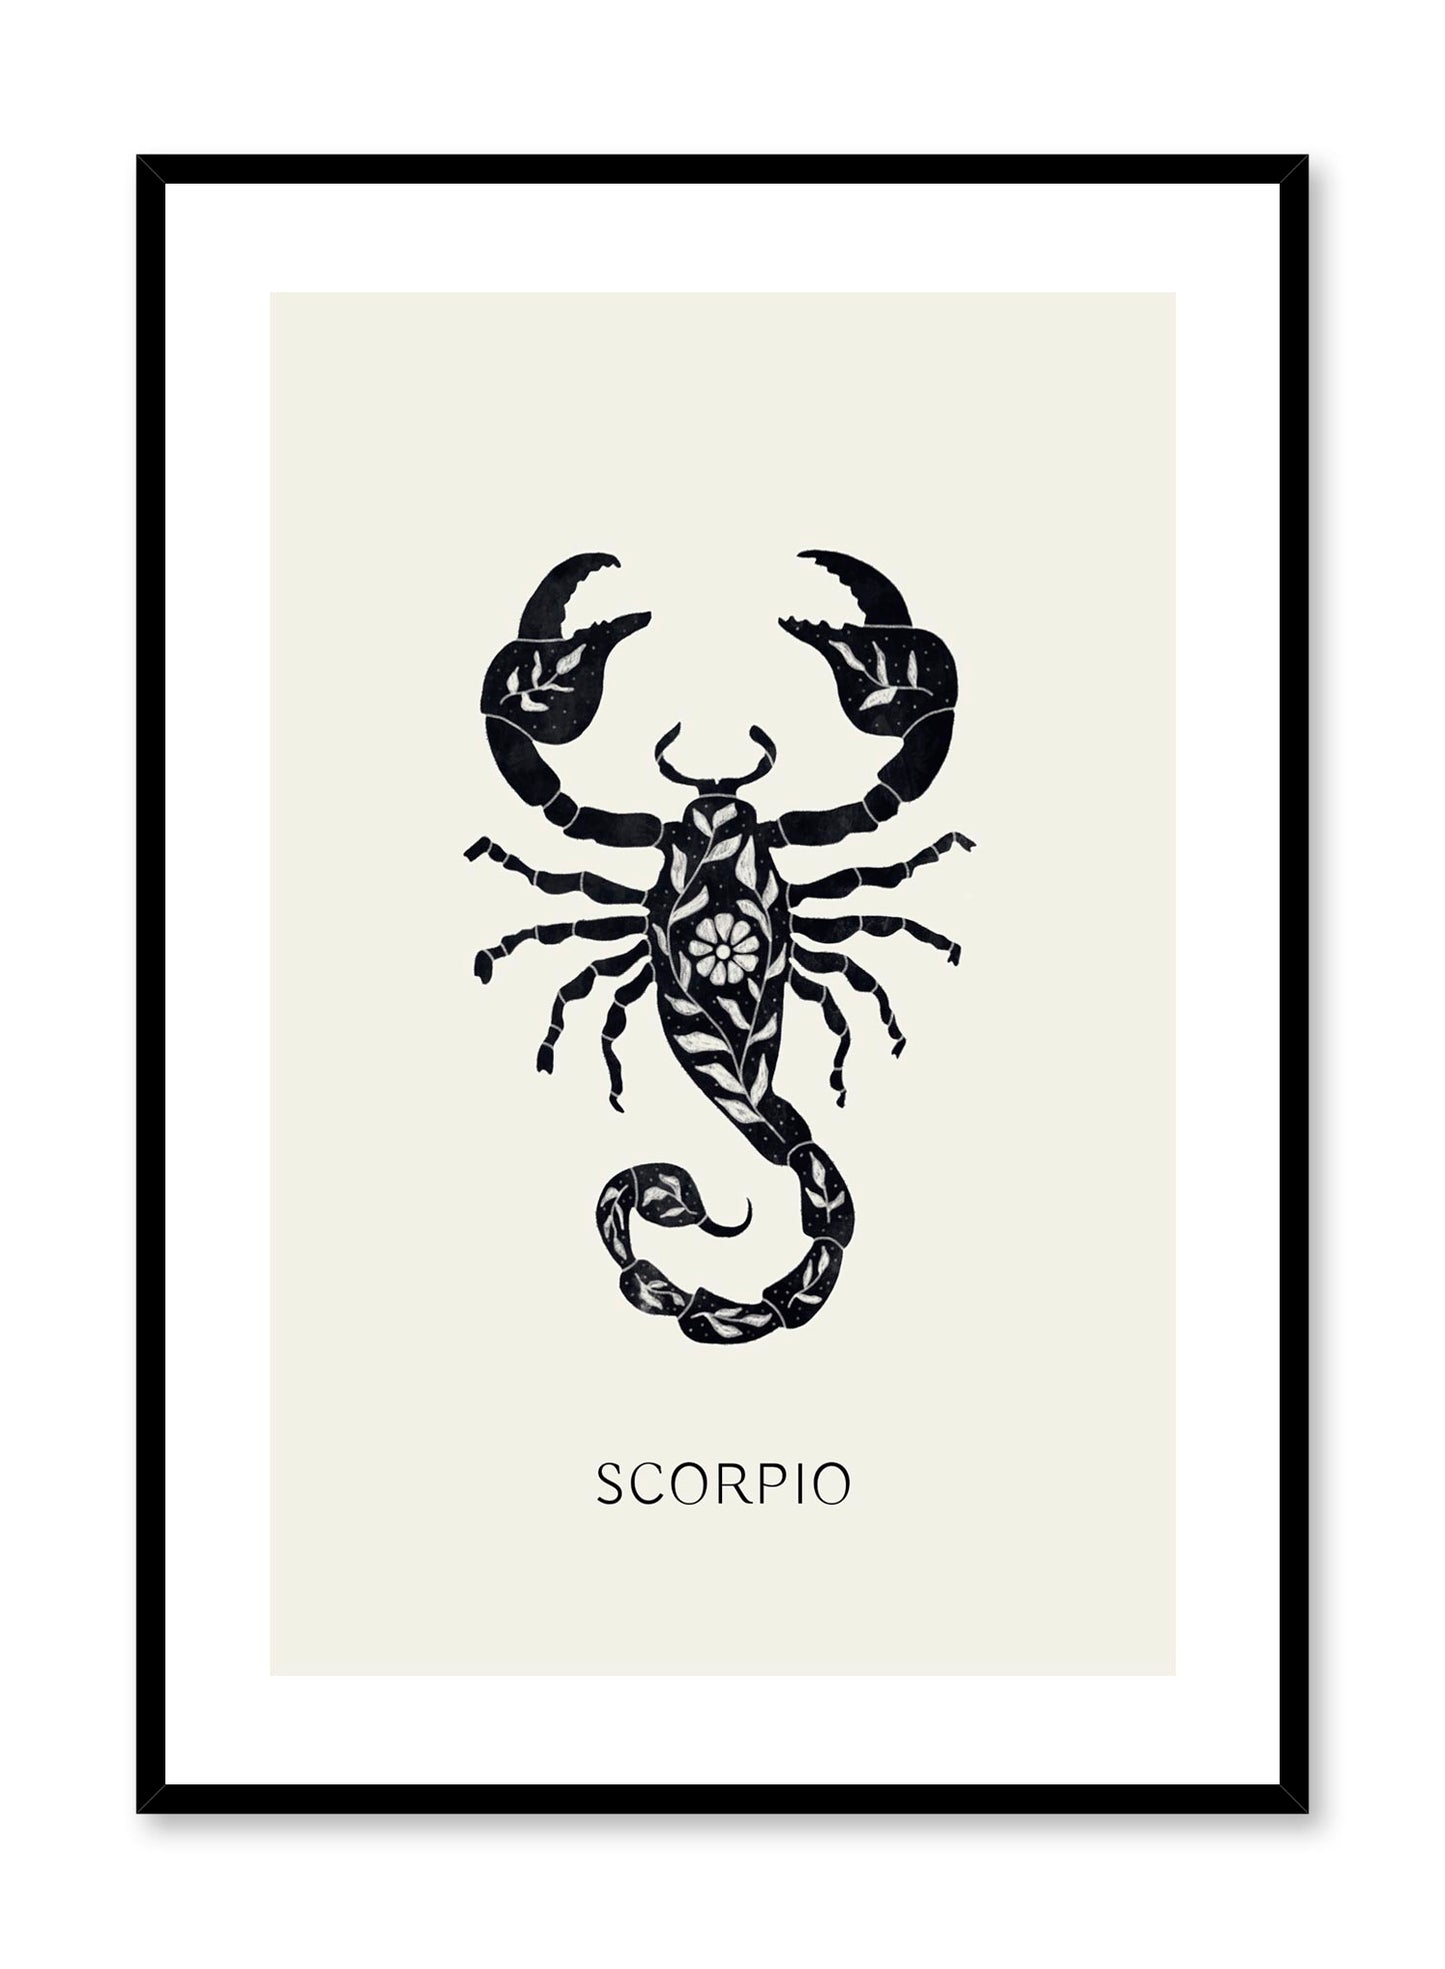 Celestial illustration poster by Opposite Wall with horoscope zodiac symbol of Scorpio